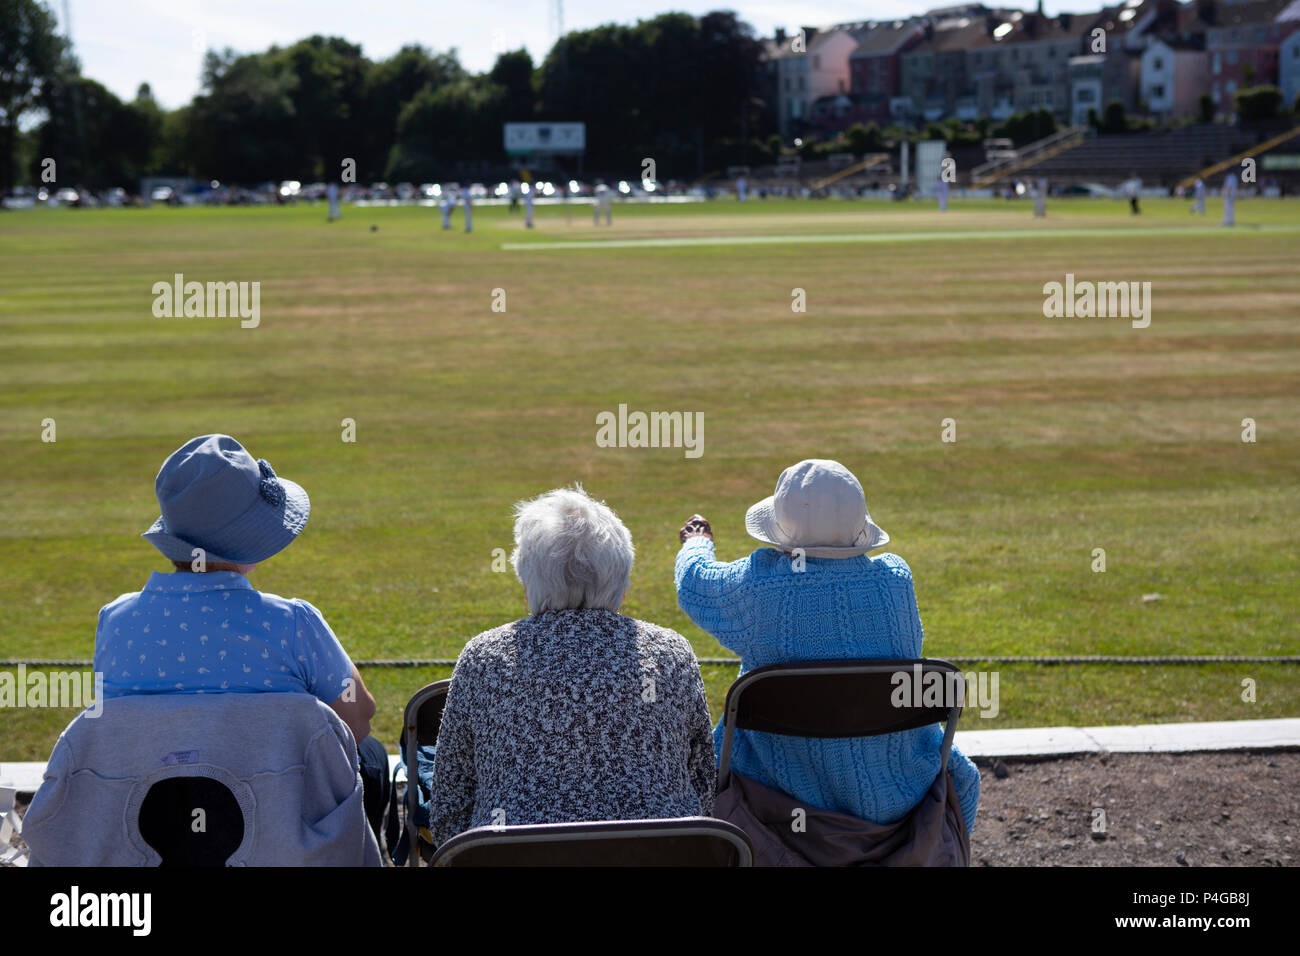 Three senior citizens enjoying watching cricket on a hot day in summer Stock Photo